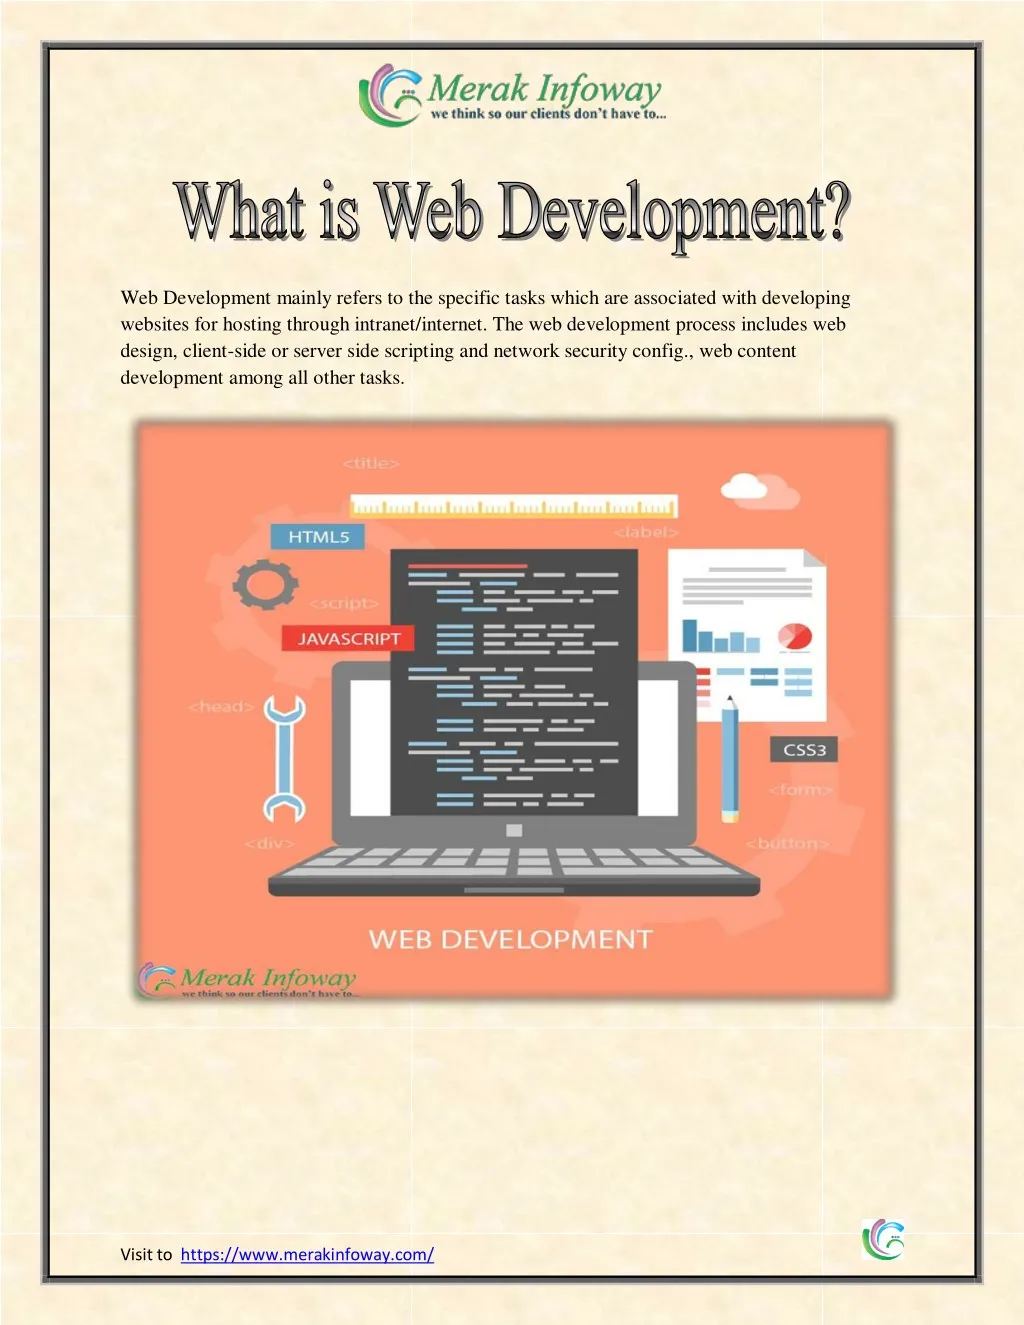 web development mainly refers to the specific